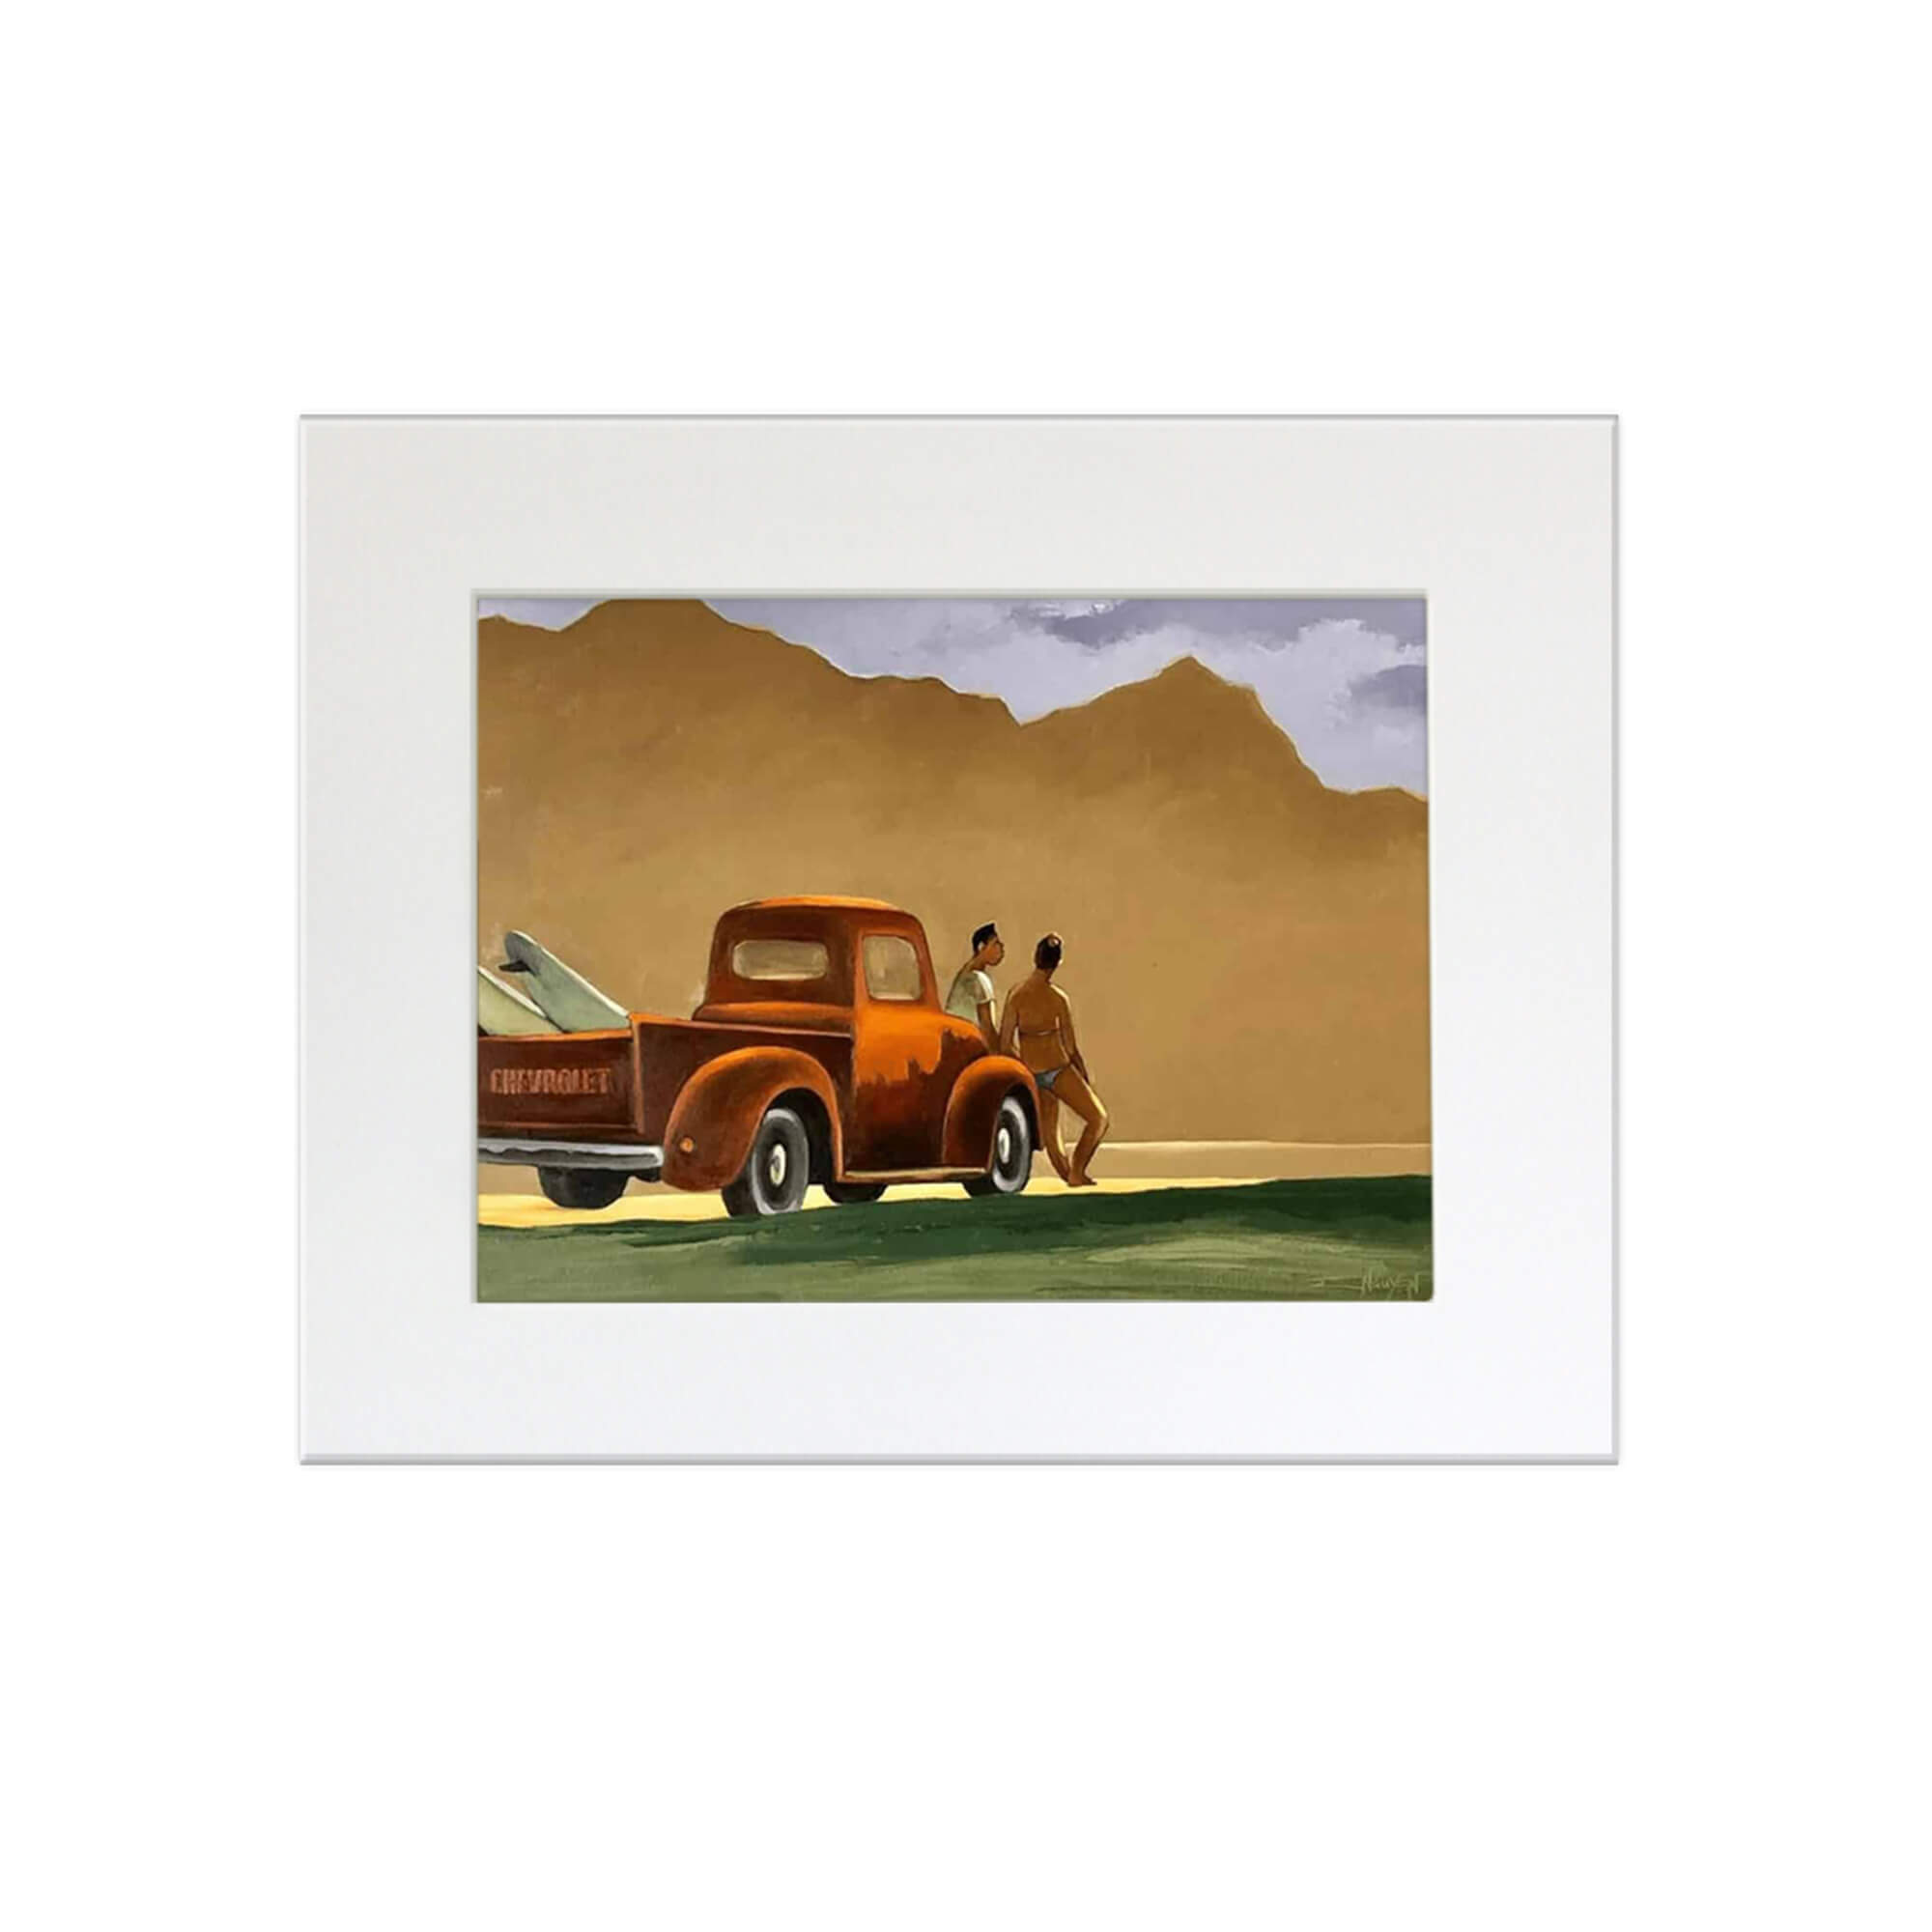 A matted art print of a local couple relaxing by their Chevrolet pickup after a surf session by Hawaii artist Tim Nguyen